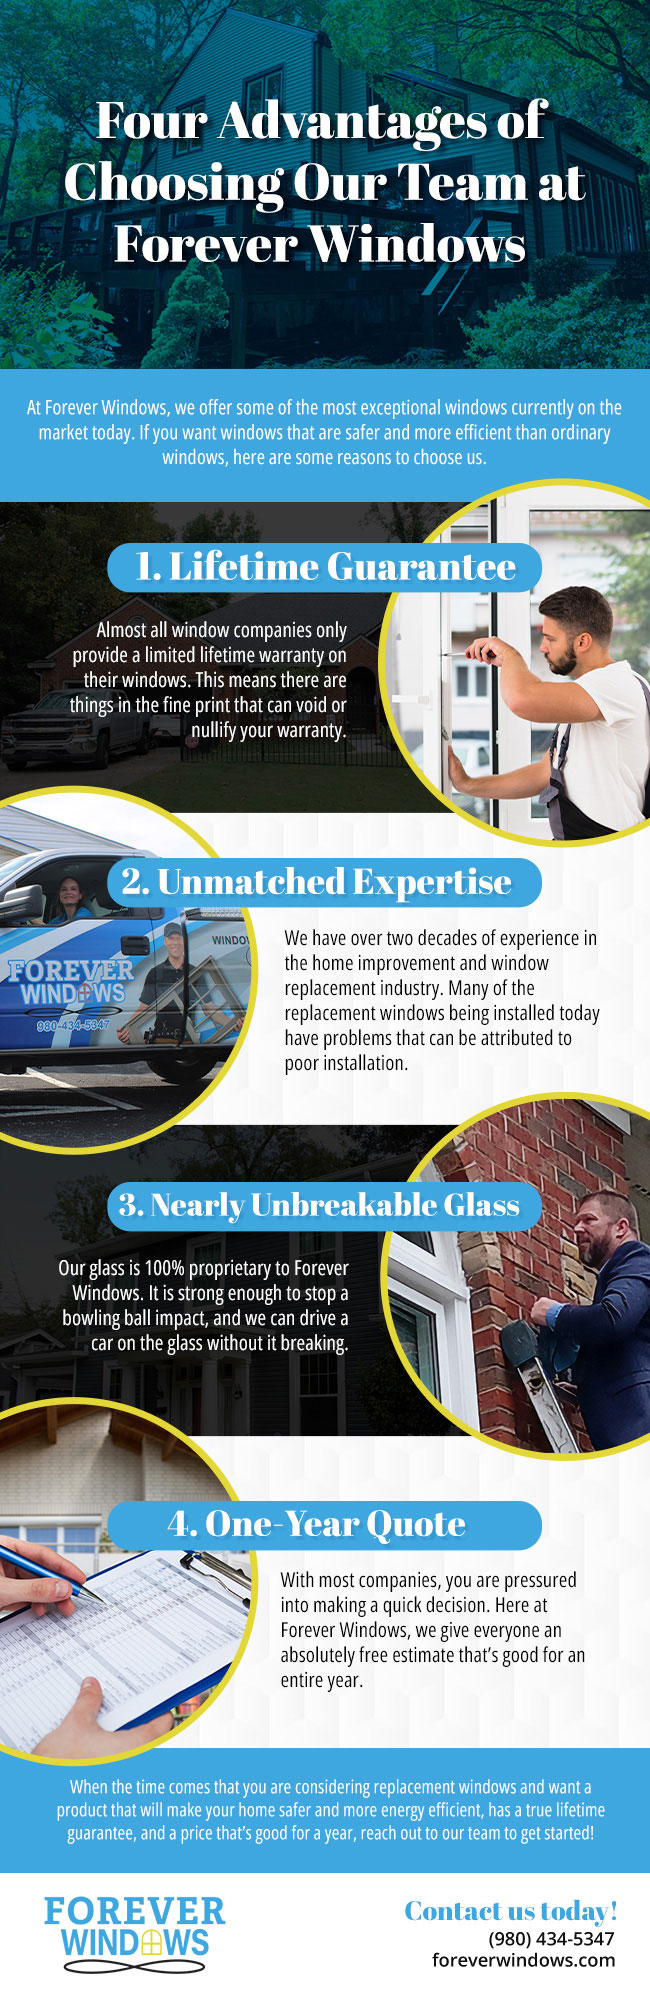 Four Advantages of Choosing Our Team at Forever Windows